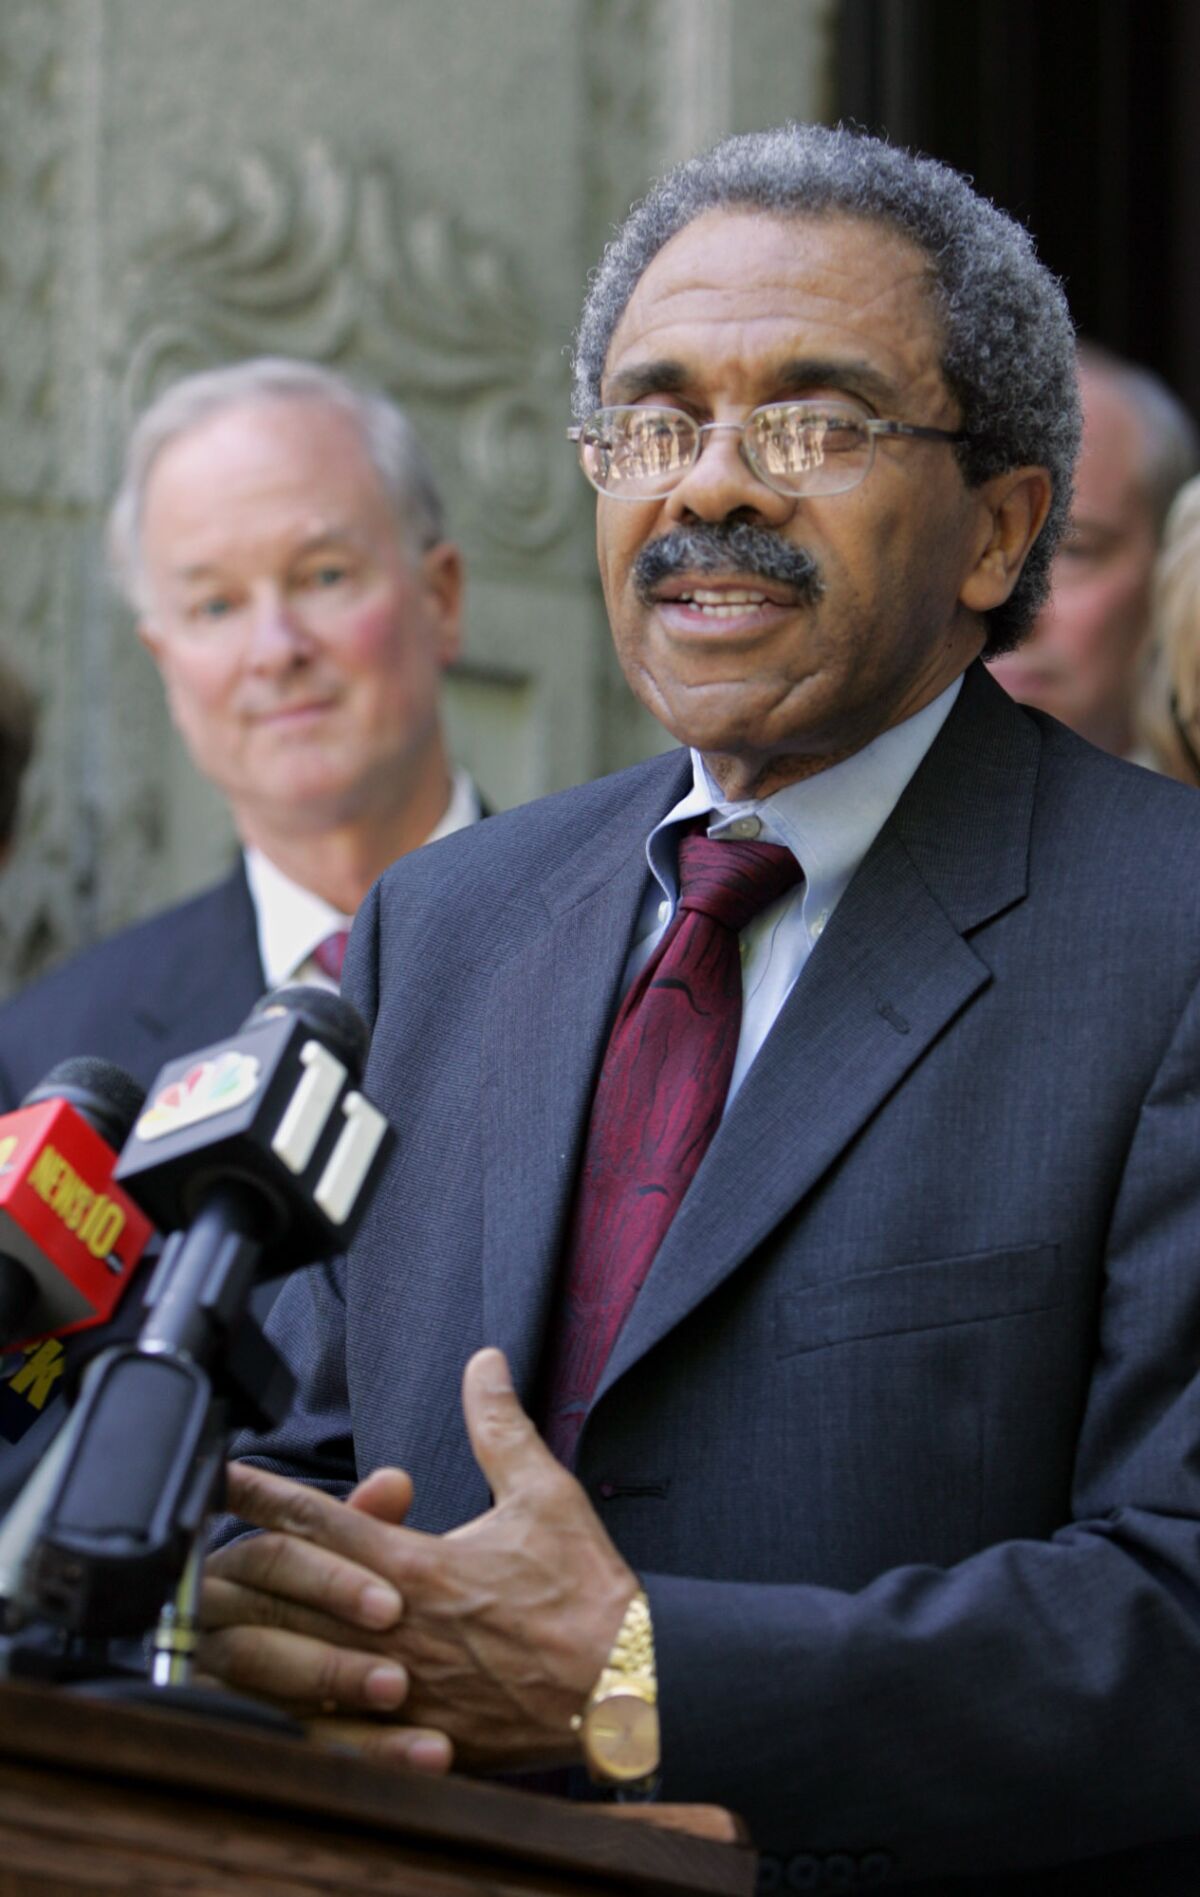 FILE - Justice Vance Raye, of the Third District Court of Appeal, speaks during a news conference held on Tuesday, May 24, 2005, in Sacramento, Calif. In a settlement agreement with the Commission on Judicial Performance, released Wednesday, June, 1, 2022, Raye has agreed to retire from his office and receive a public admonishment for engaging in a pattern of delay in deciding approximately 200 appellate matters over a 10-year period. (AP Photo/Rich Pedroncelli, File)